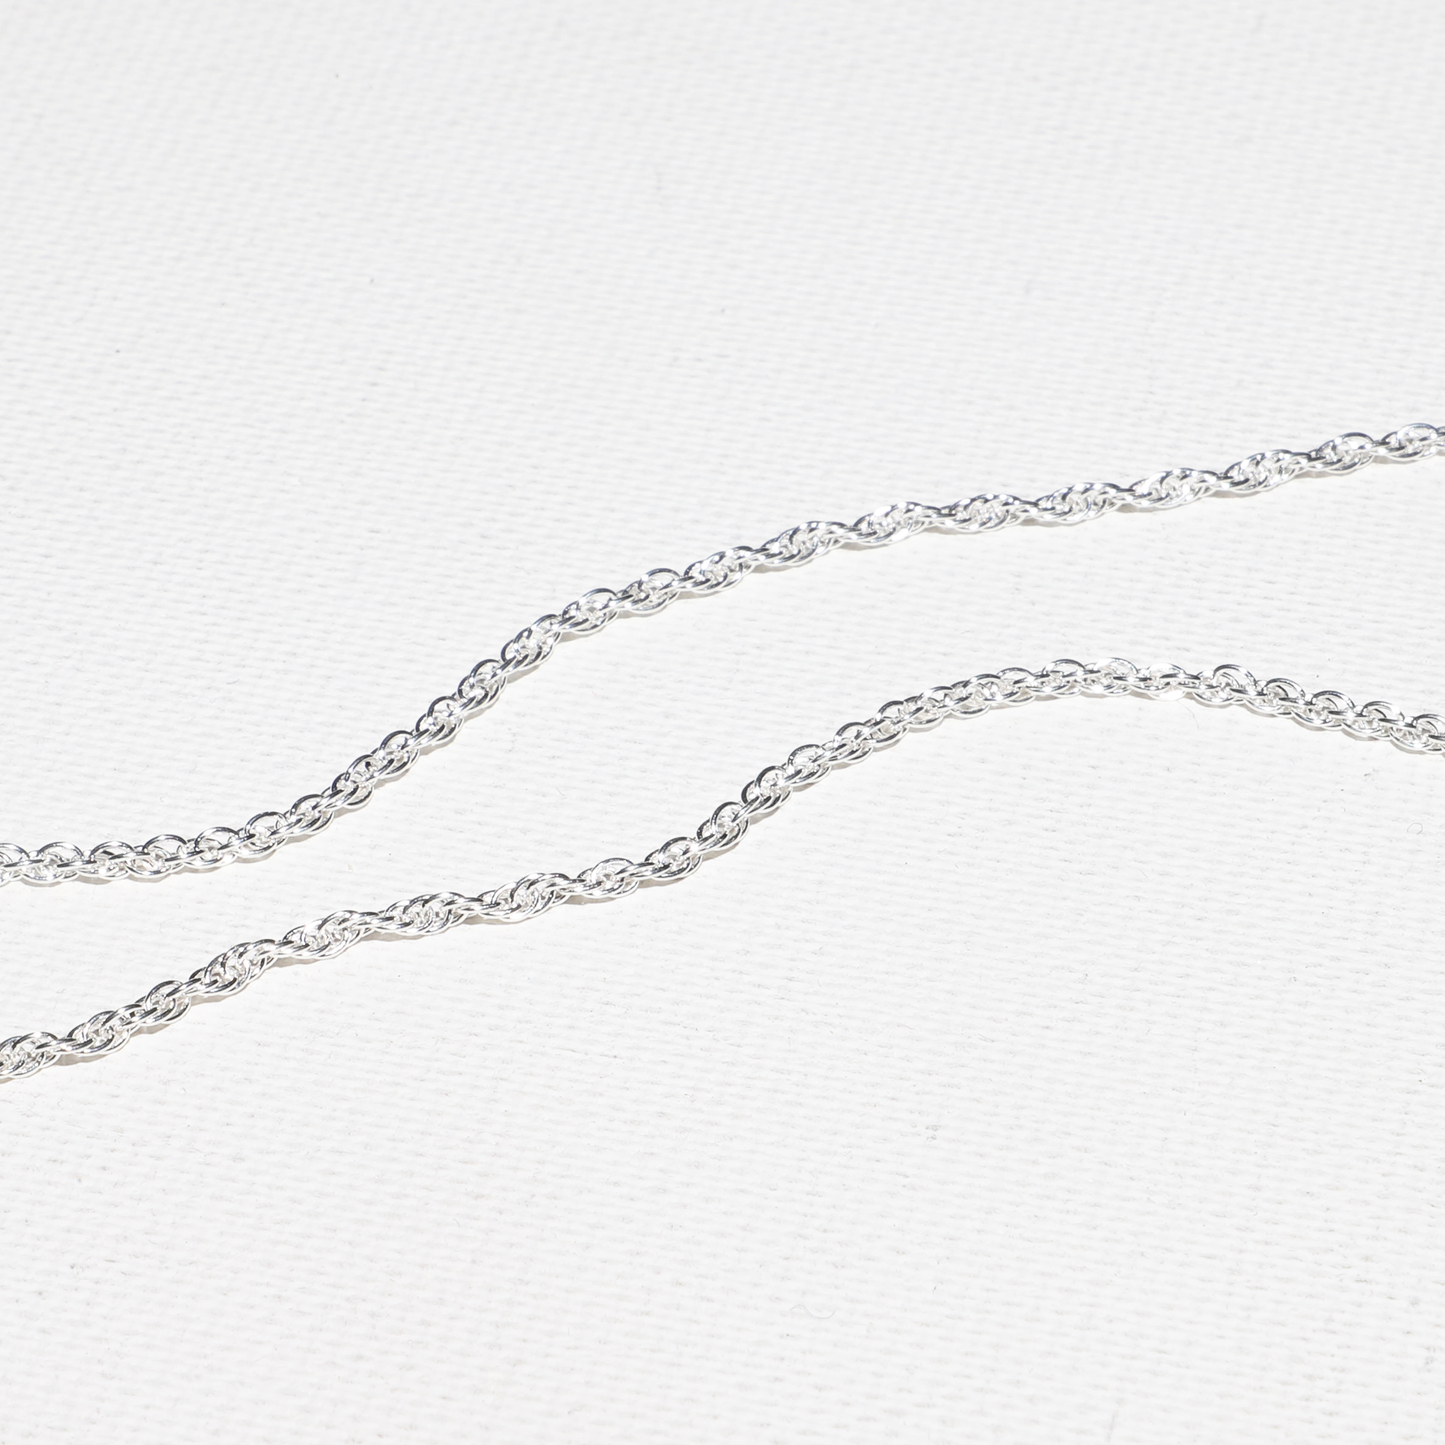 【JeP】Singapore Chained Necklace